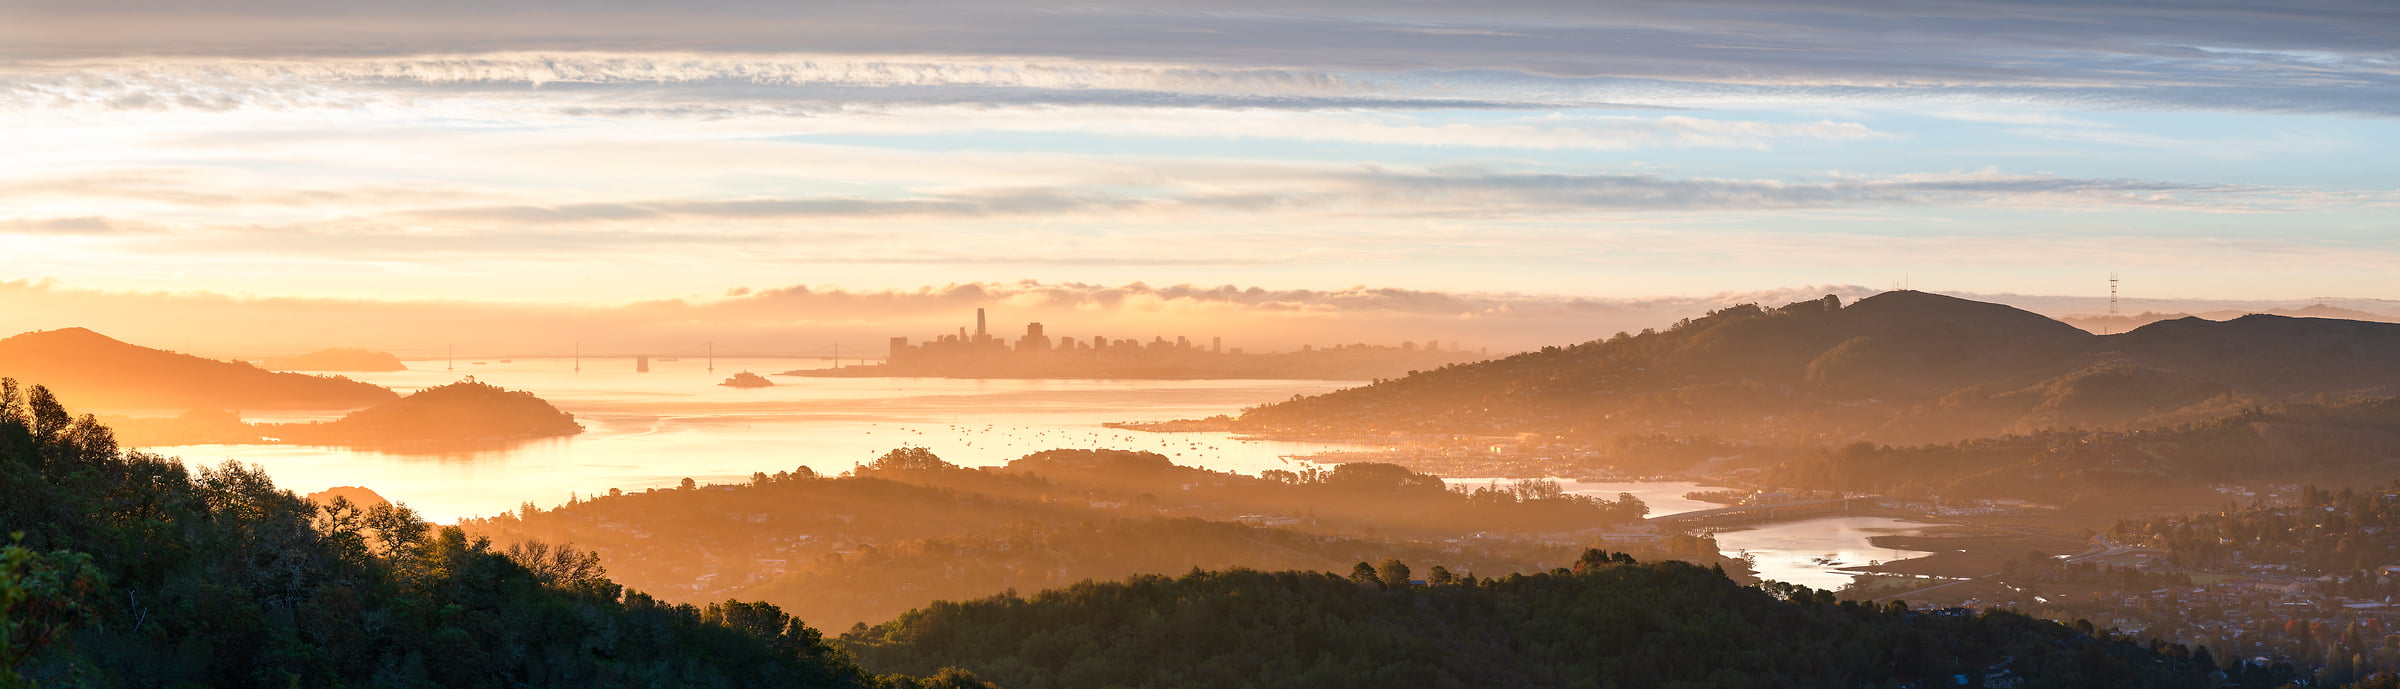 231 megapixels! A very high resolution, large-format VAST photo print of San Francisco at sunrise; landscape photograph created by Jeff Lewis in Marin County, California